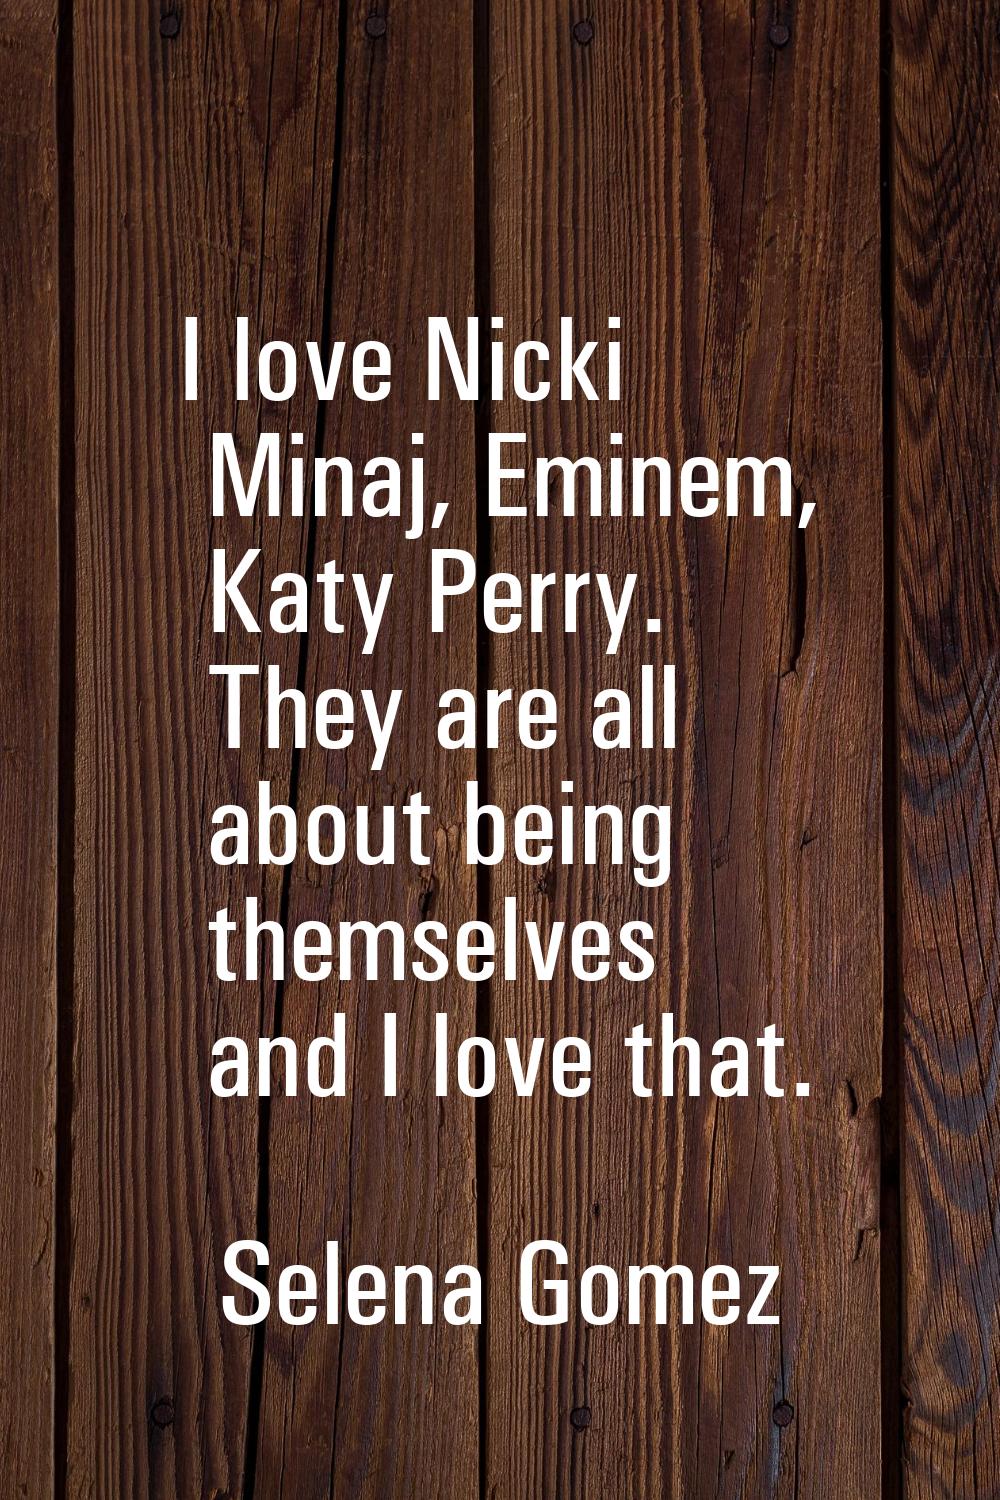 I love Nicki Minaj, Eminem, Katy Perry. They are all about being themselves and I love that.